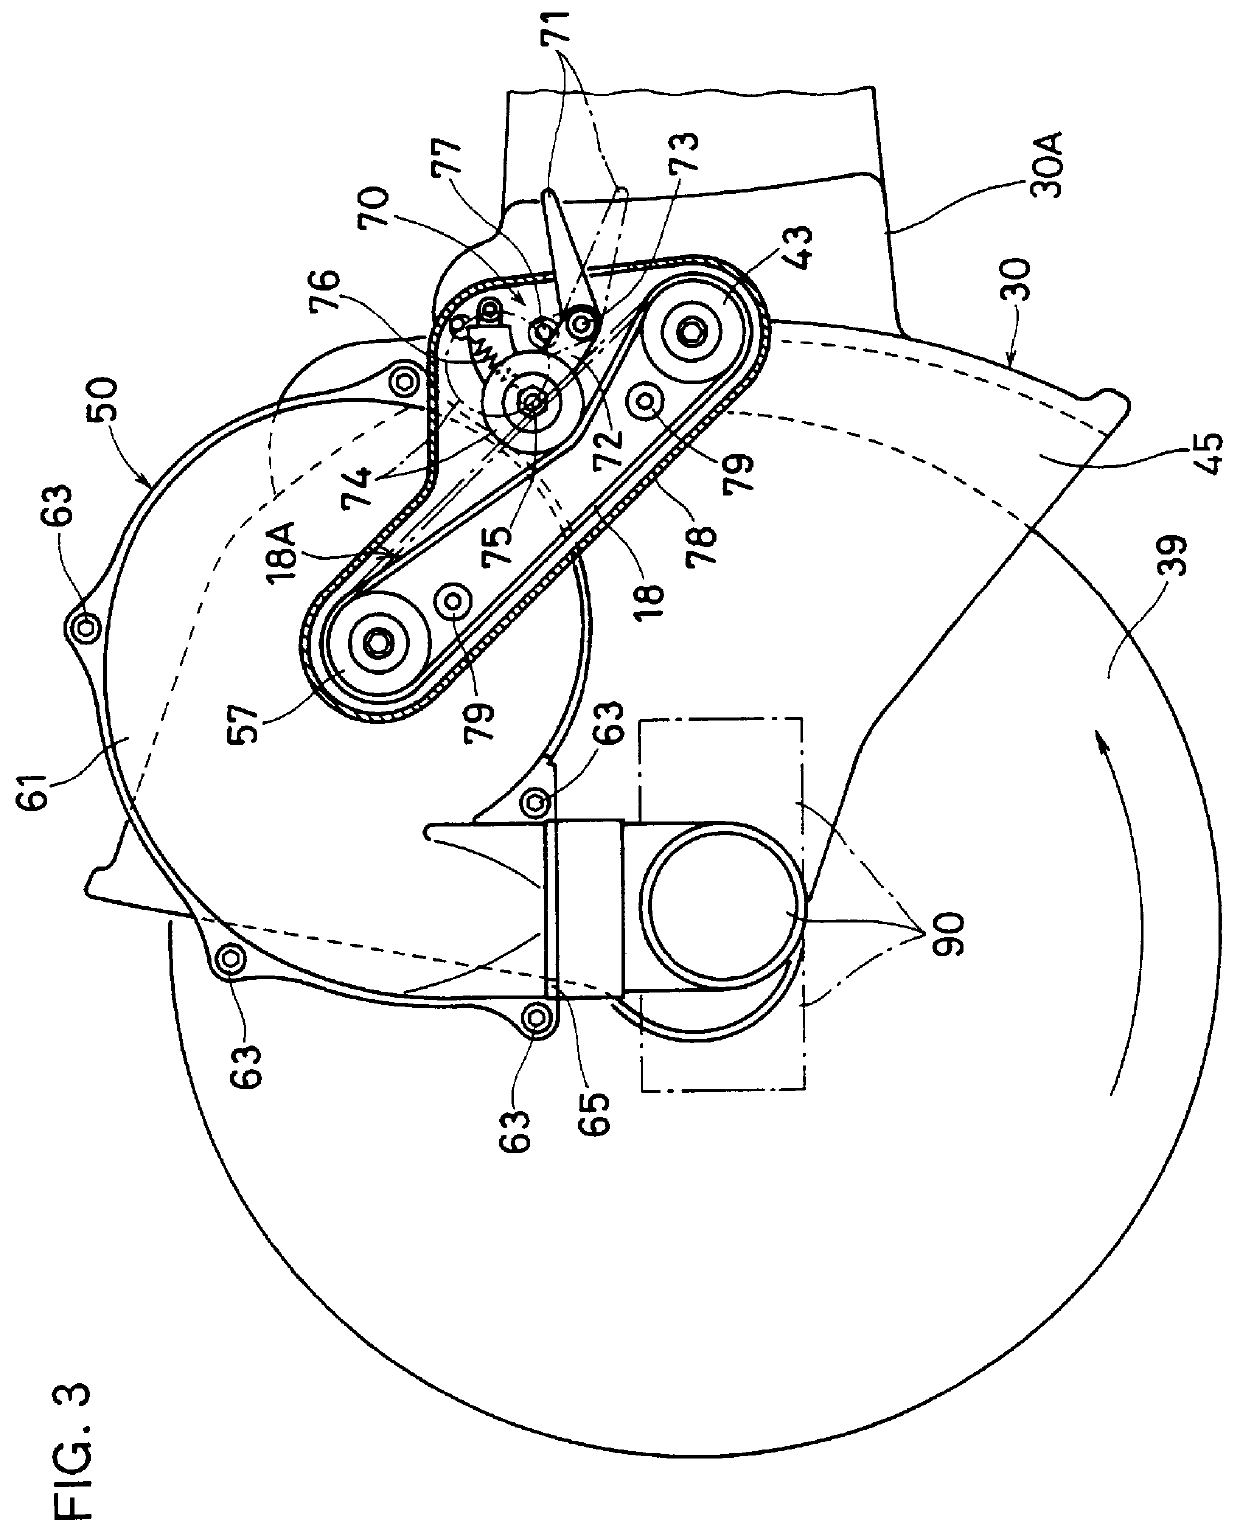 Power cutter and centrifugal clutch for a power cutter